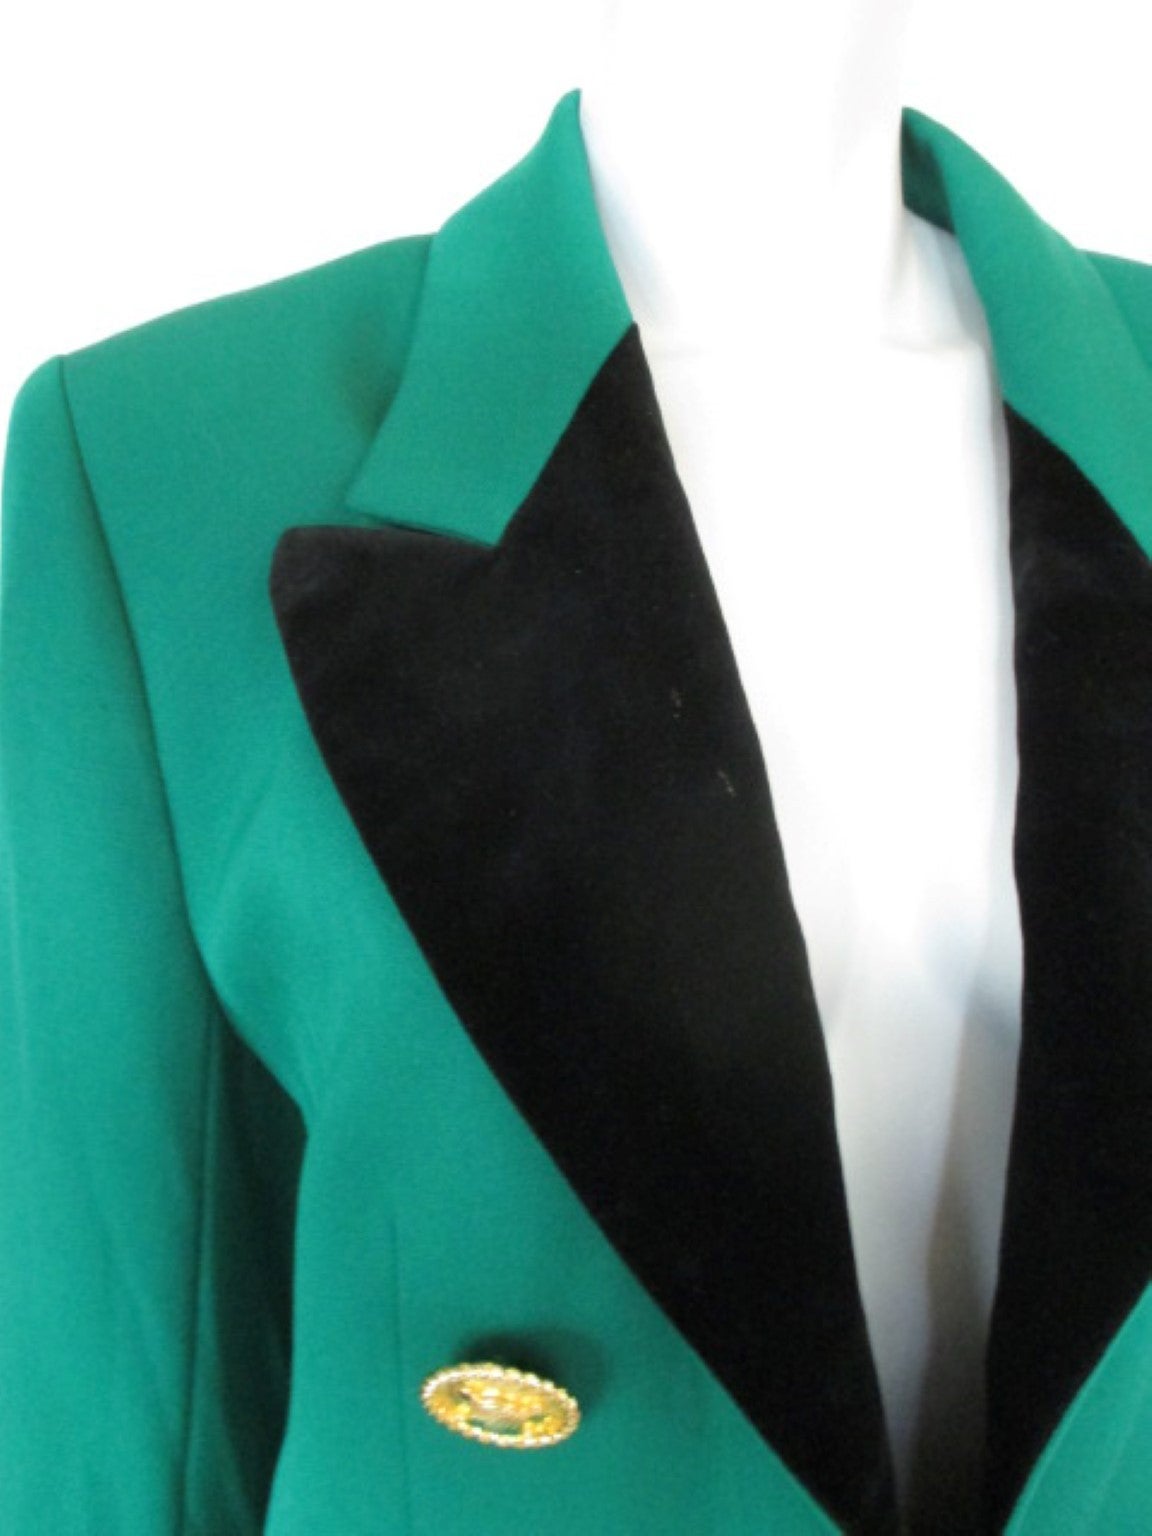 Green wool blazer with black velvet collars and golden buttons at the front and sleeves. 
Its 100% wool
size marked as France 44, fits like EU 40/42 US 10/12